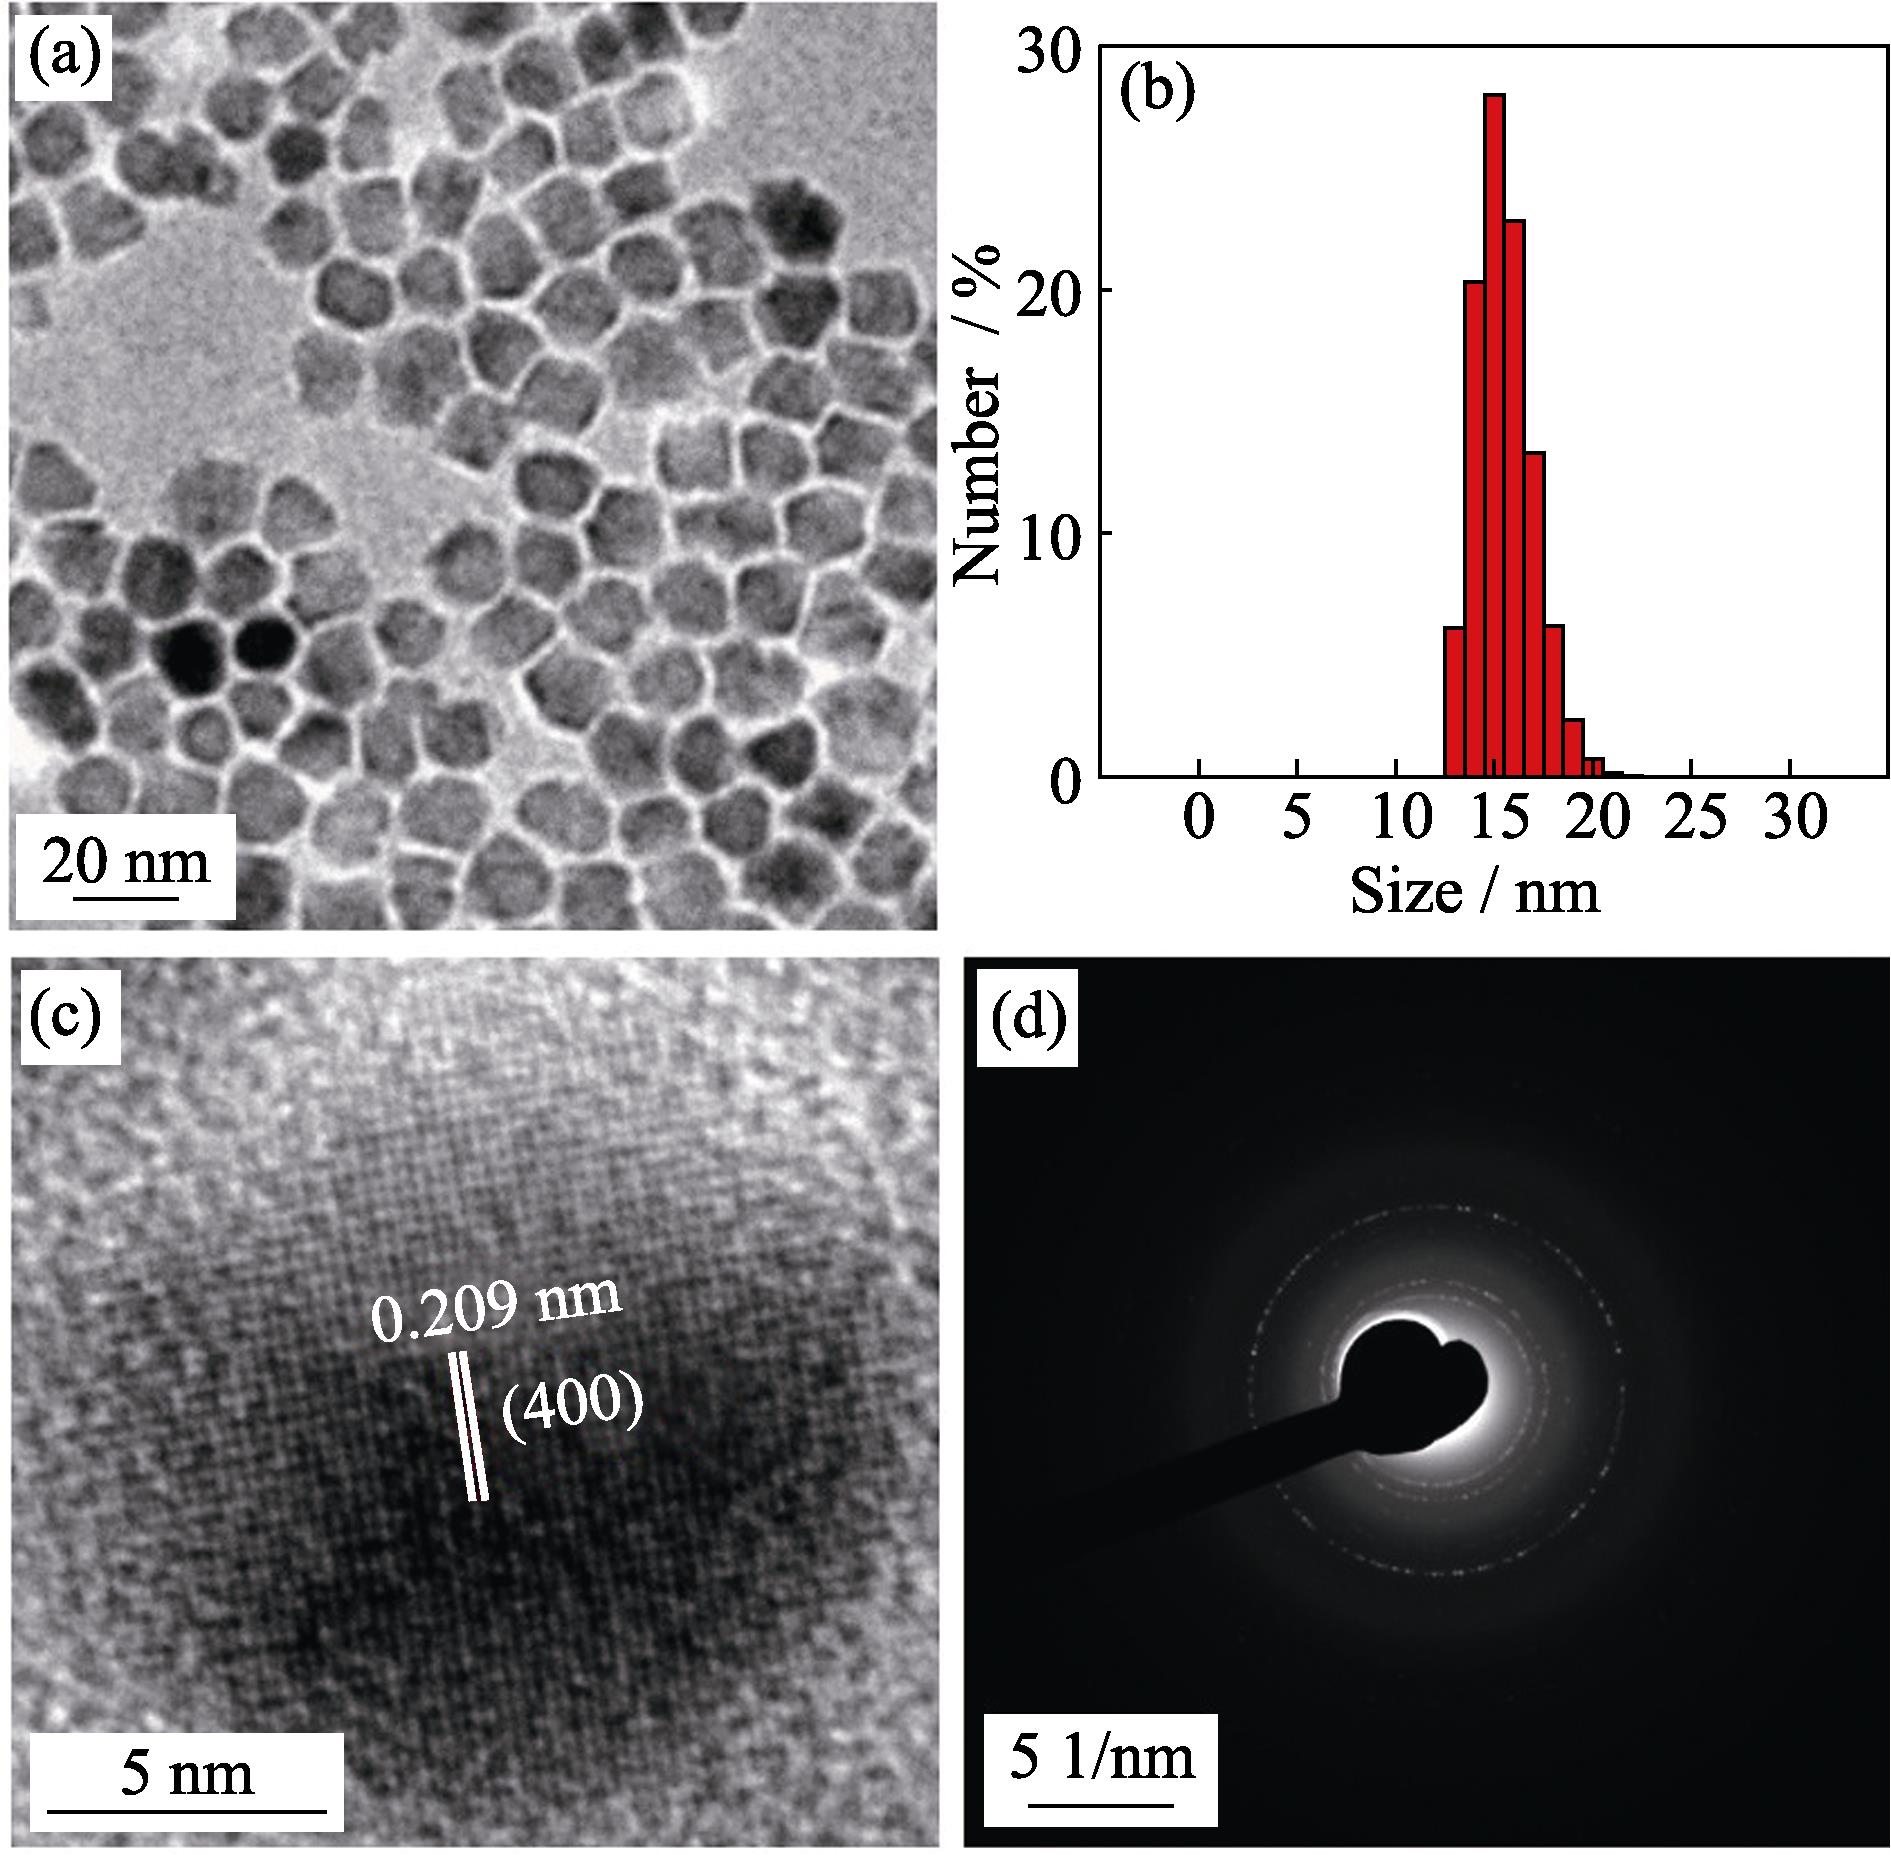 TEM image (a), histograms of their size distributions (b), high-resolution TEM image (c) and selected area electron diffraction (SAED) pattern (d) of 15 nm-sized ZnMn-Fe3O4 nanoparticles prepared from Fe(acac)3, MnCl2 and ZnCl2